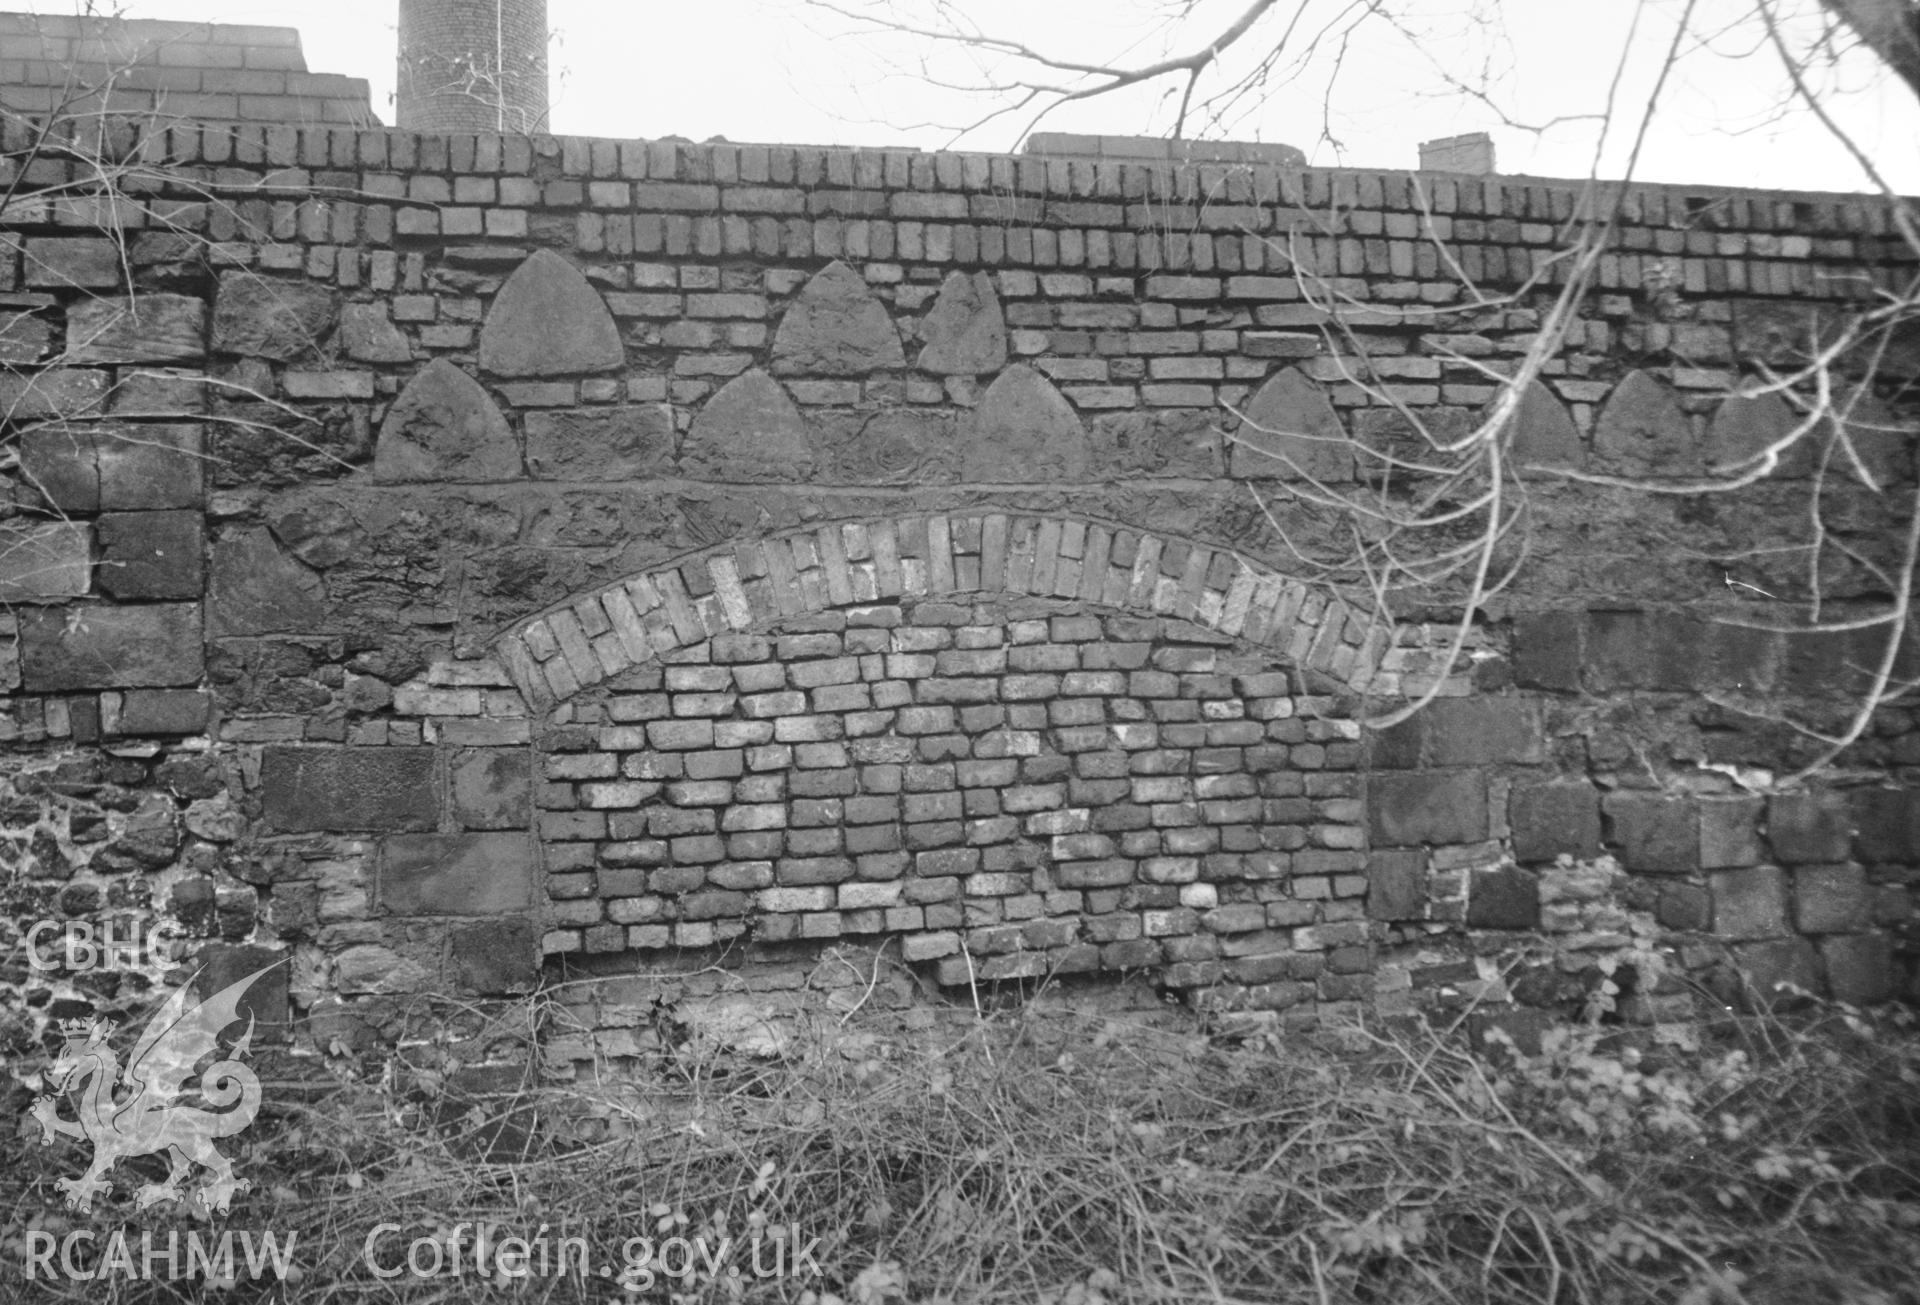 Photograph of Hafod Copperworks, Swansea: showing the work's wall and moulded slag blocks.